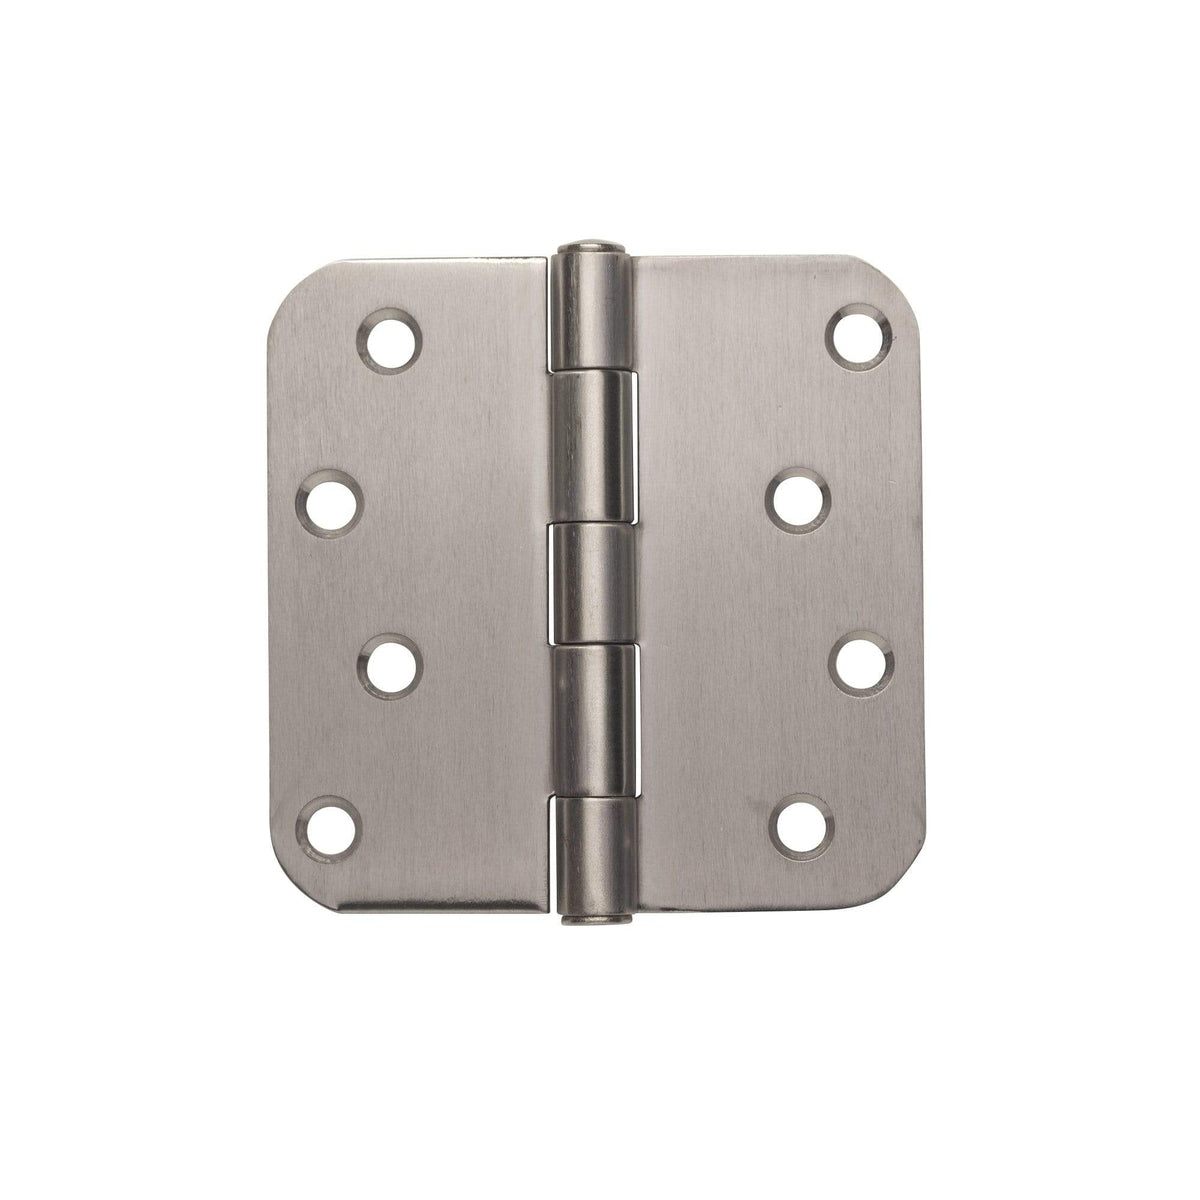 Clearance - Hinges Residential Hinges - 4" X 4" Plain Bearing With 5/8" Radius Corners - Sold Individually